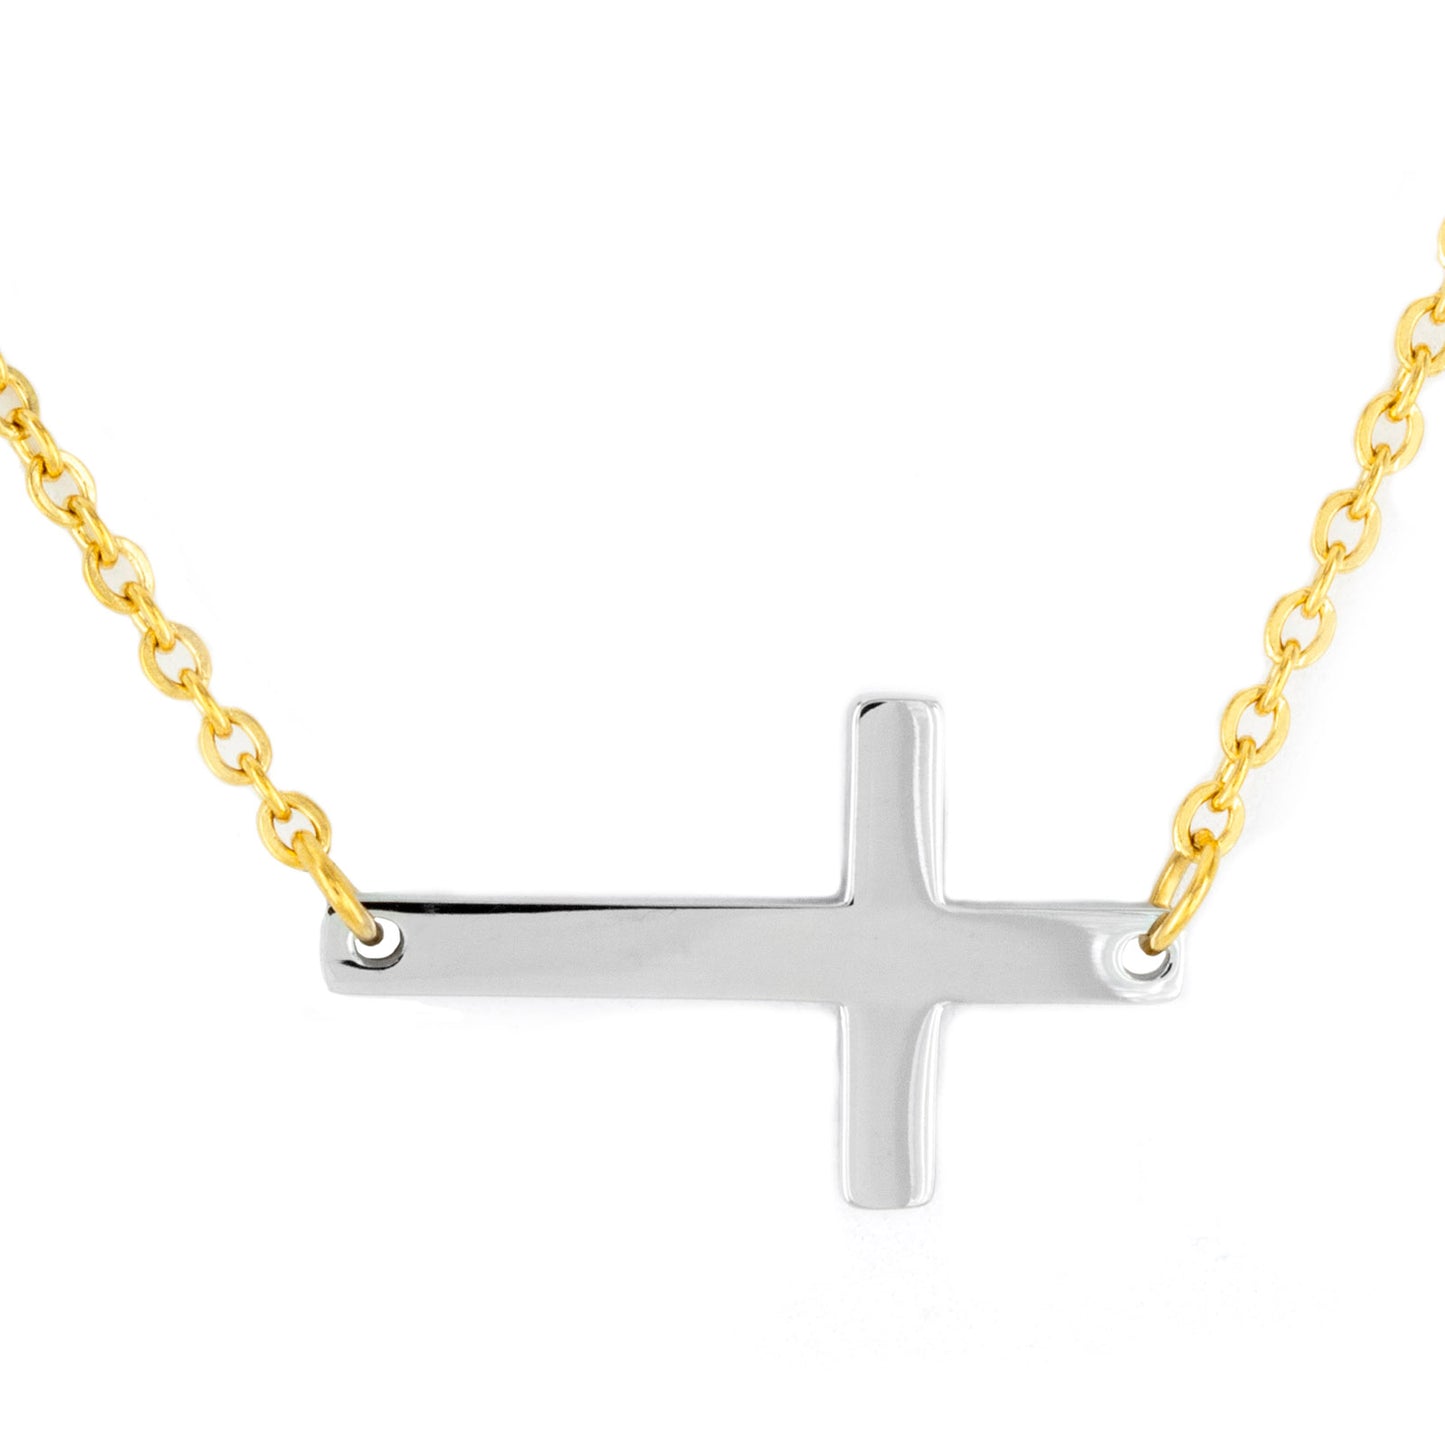 ELYA Polished Sideways Cross Gold Plated Two-Tone Stainless Steel Necklace (2 mm) - 18"